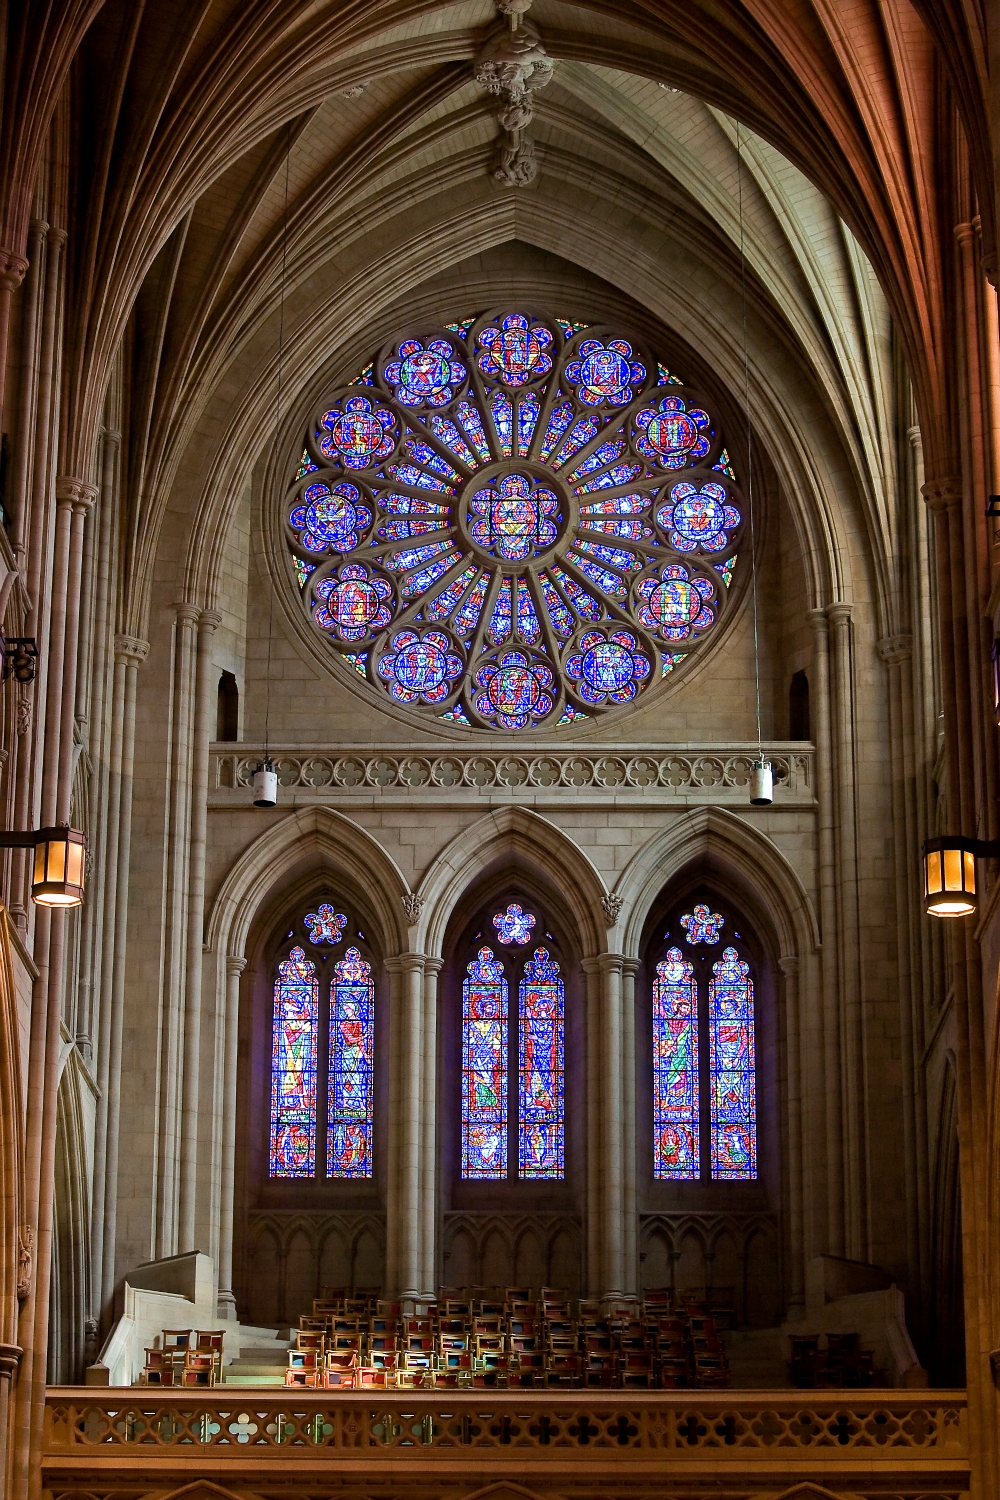 The South Rose Window